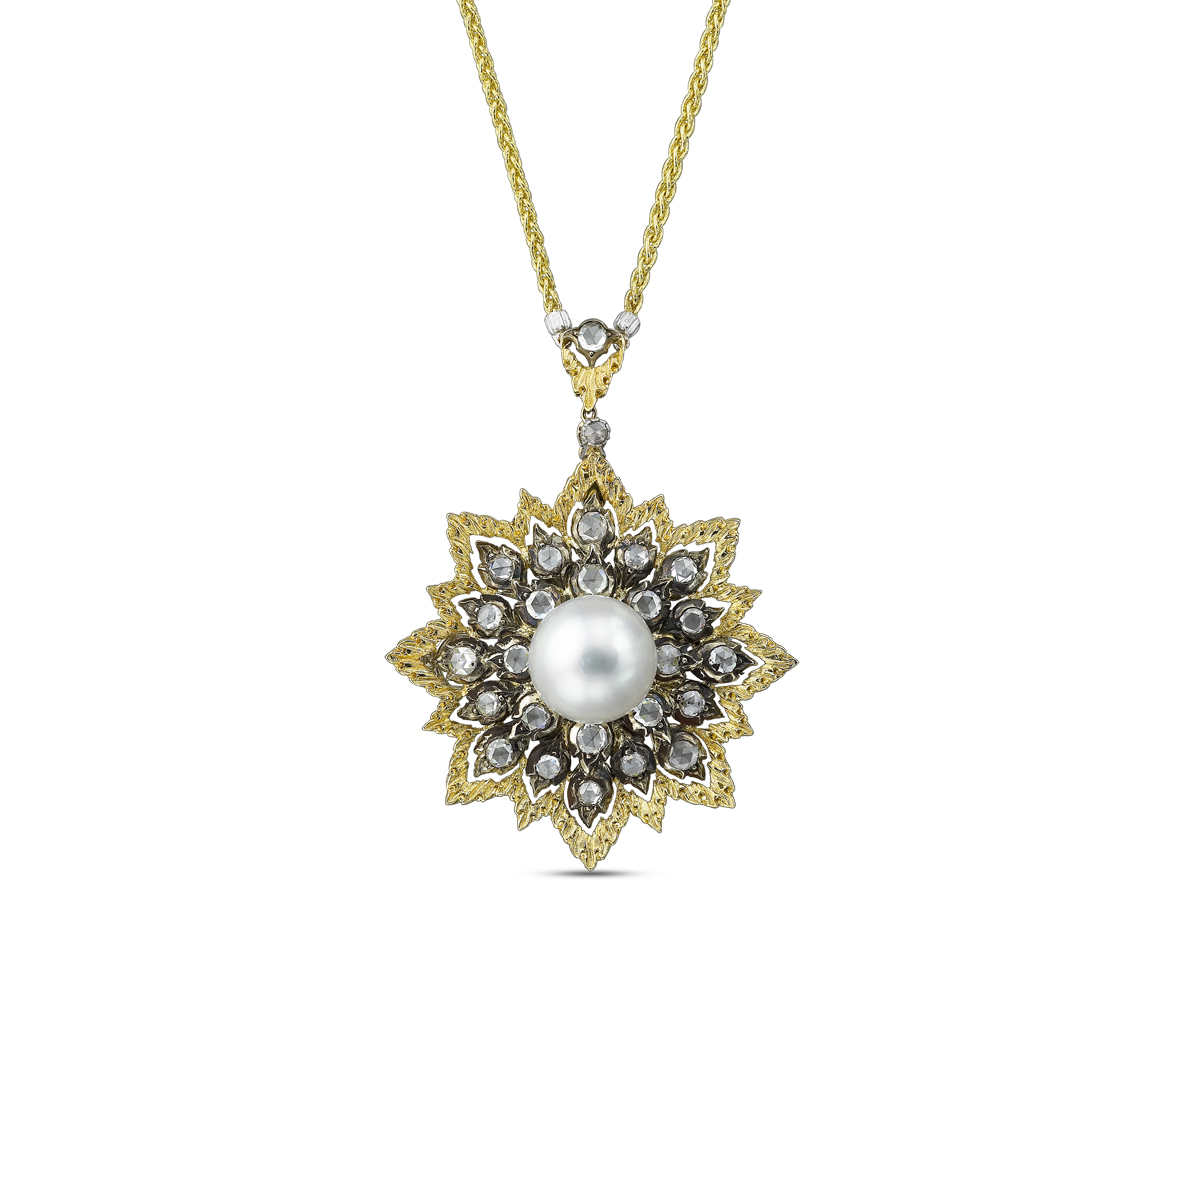 COCKTAIL PENDANT IN SILVER AND GOLD SET WITH 26 ROSE CUT DIAMONDS( 4,44 CT.) AND 1 ROUND PEARLS (23,8) BY BUCCELLATI